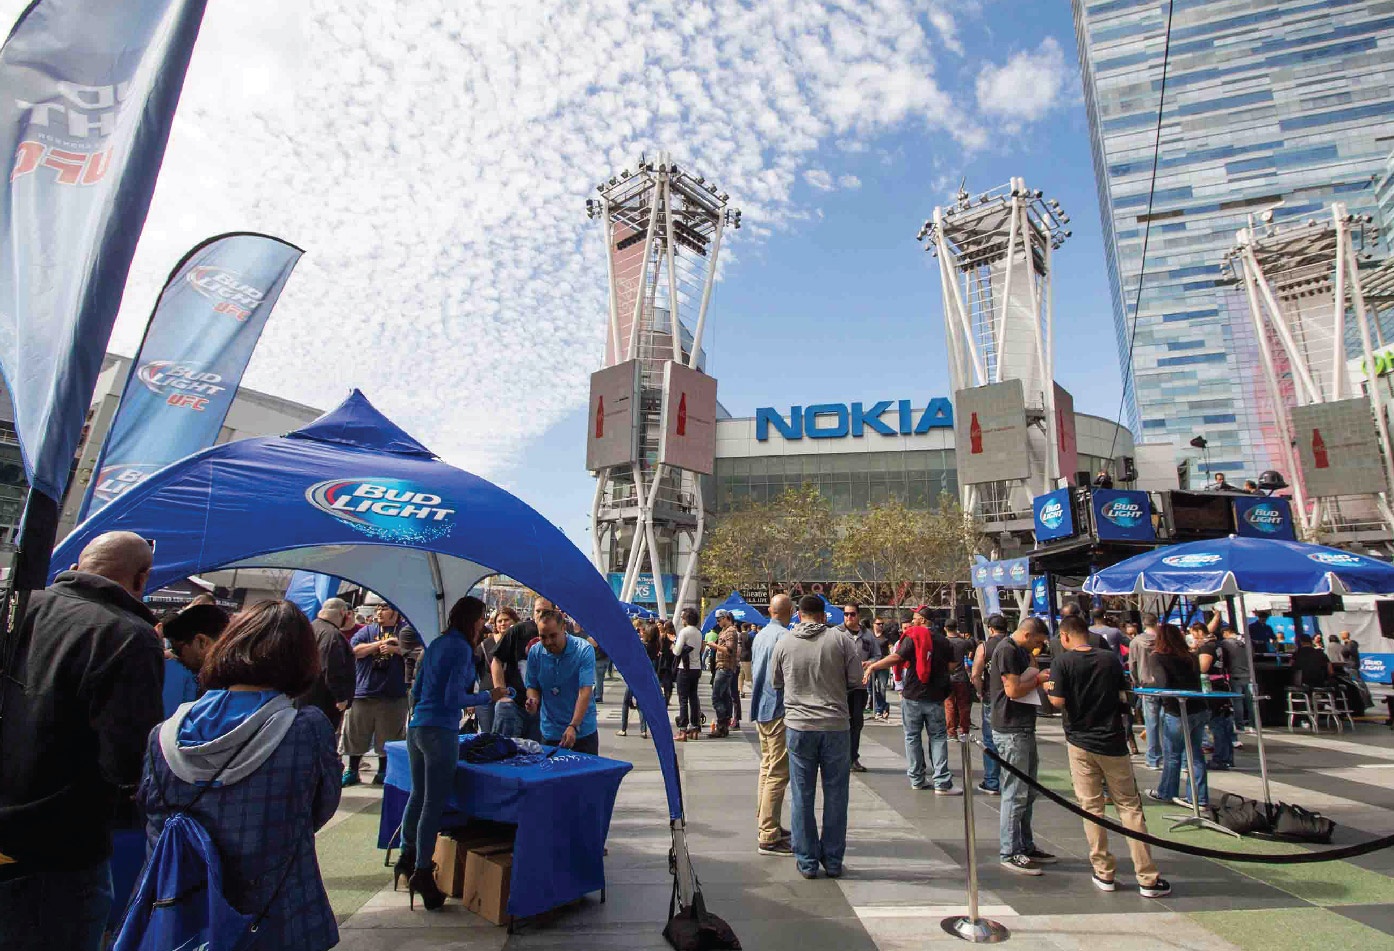 Bud Light Printed Arch Frame Tent at Nokia Theater, LA Live, UFC Event